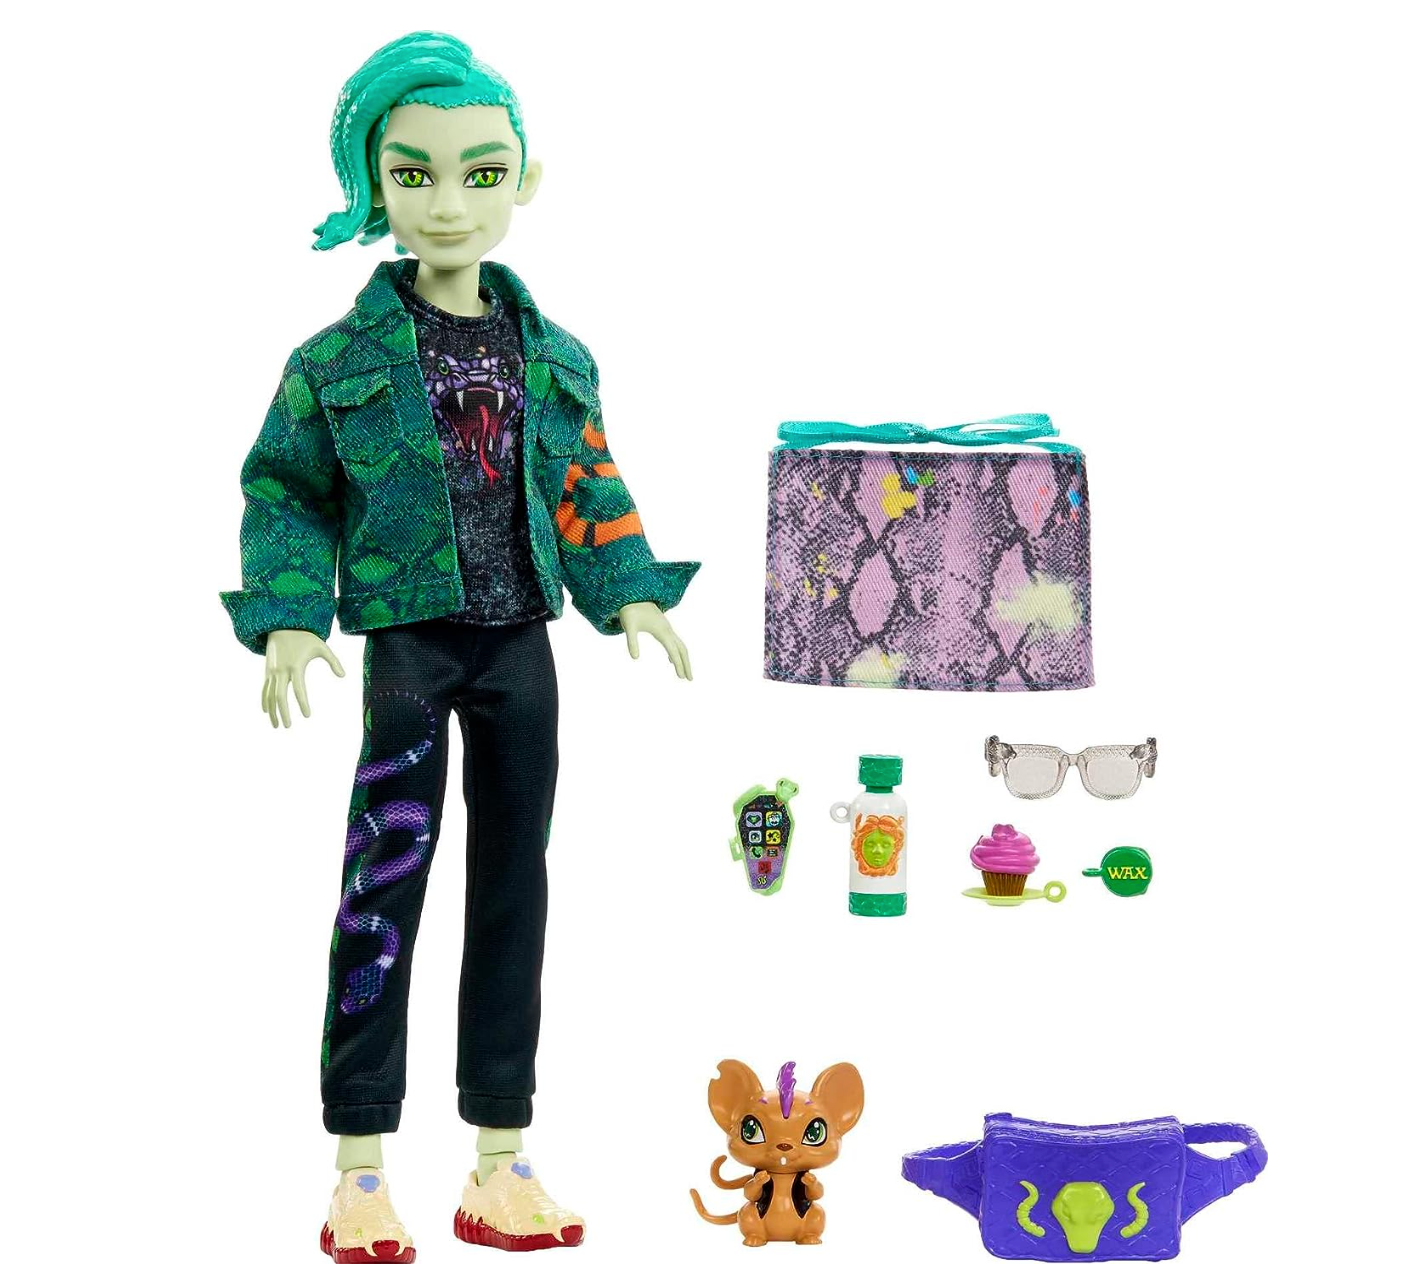 Monster High Deuce Gorgon Fashion Doll with Denim Snake Jacket, Signature Look, Accessories & Pet